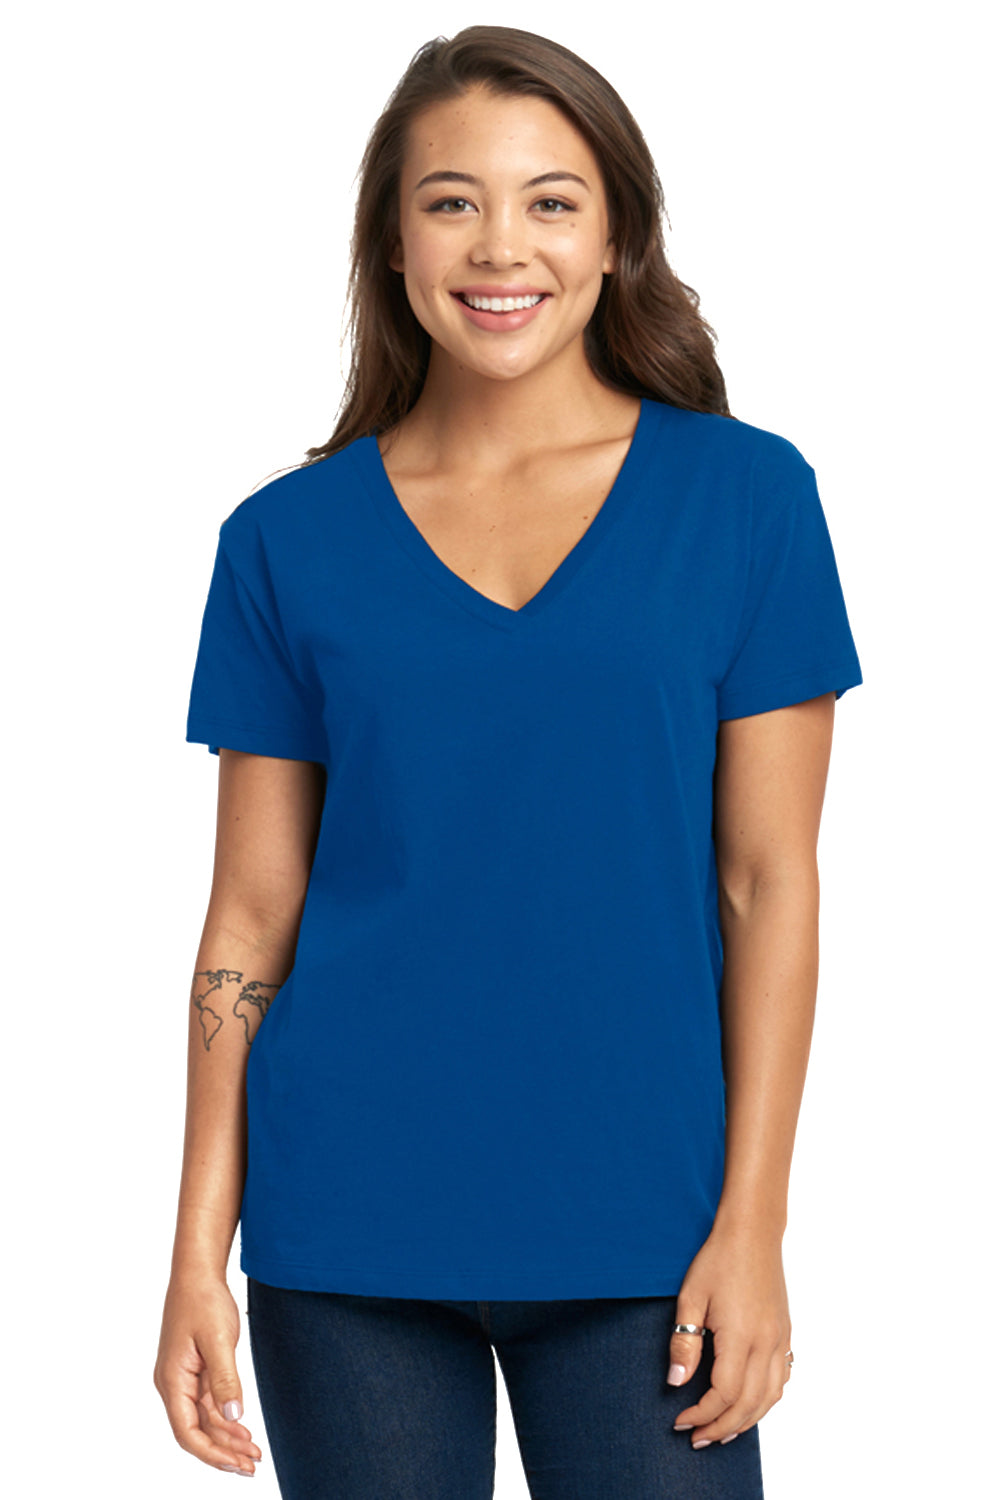 Next Level 3940 Womens Relaxed Short Sleeve V-Neck T-Shirt Royal Blue Front